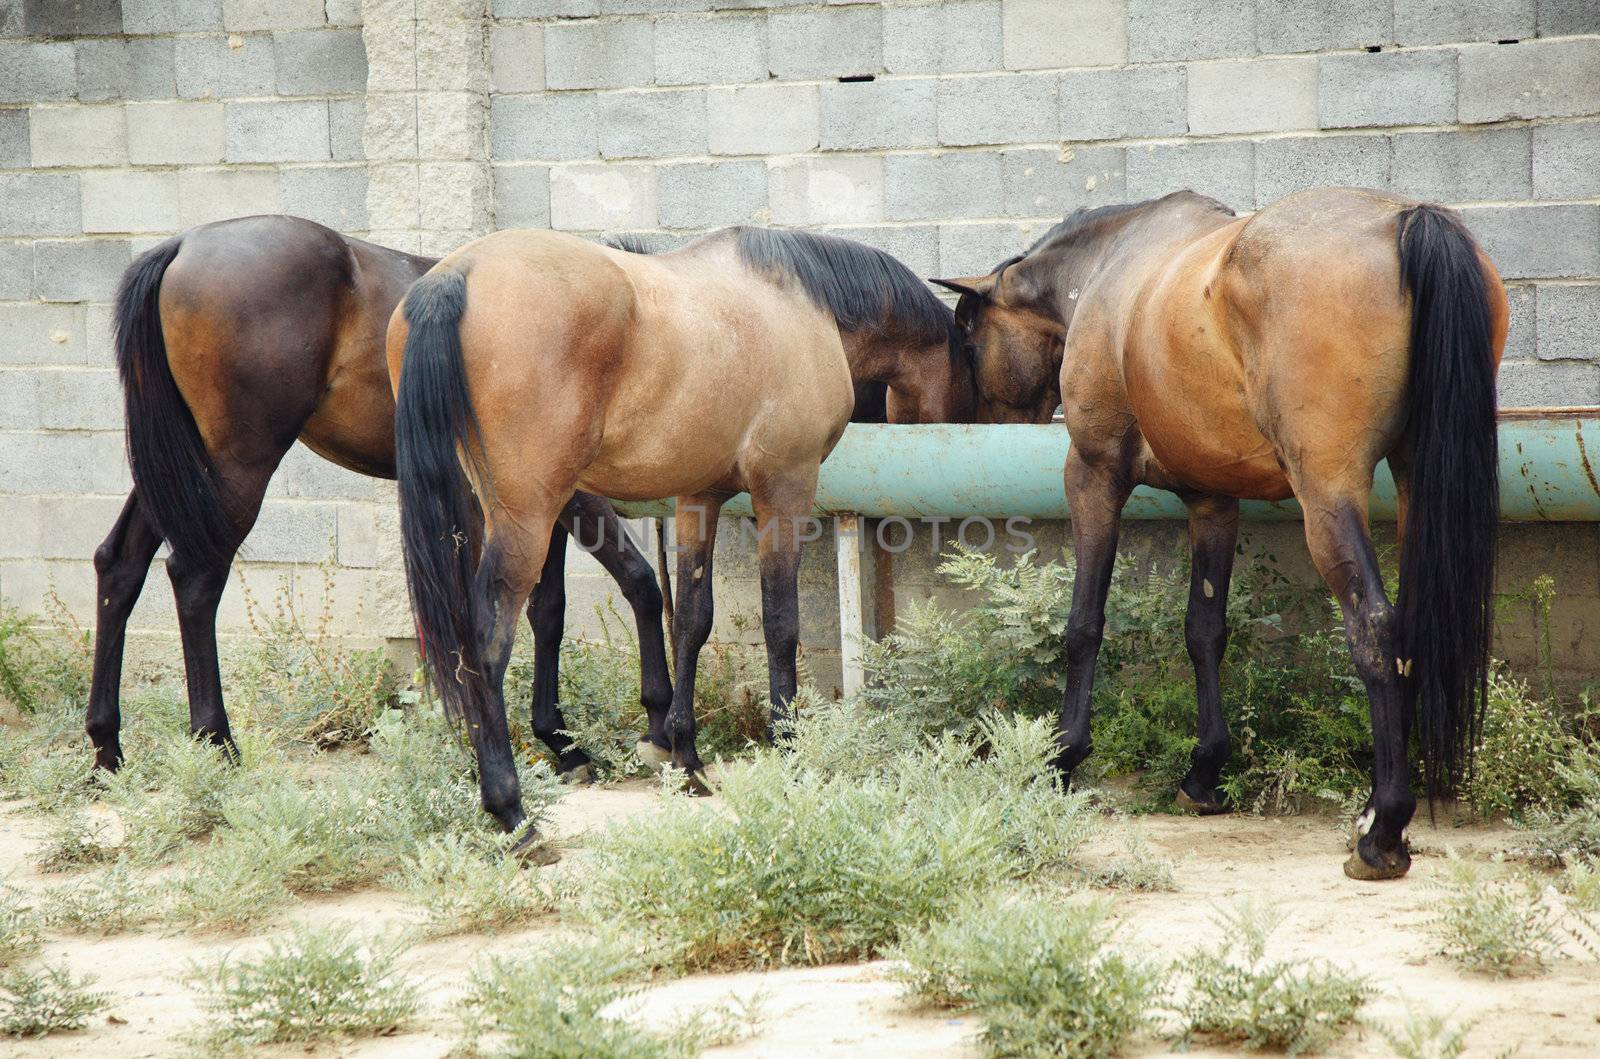 Rear view on three brown horses drinking at the watering place. Natural light and colors